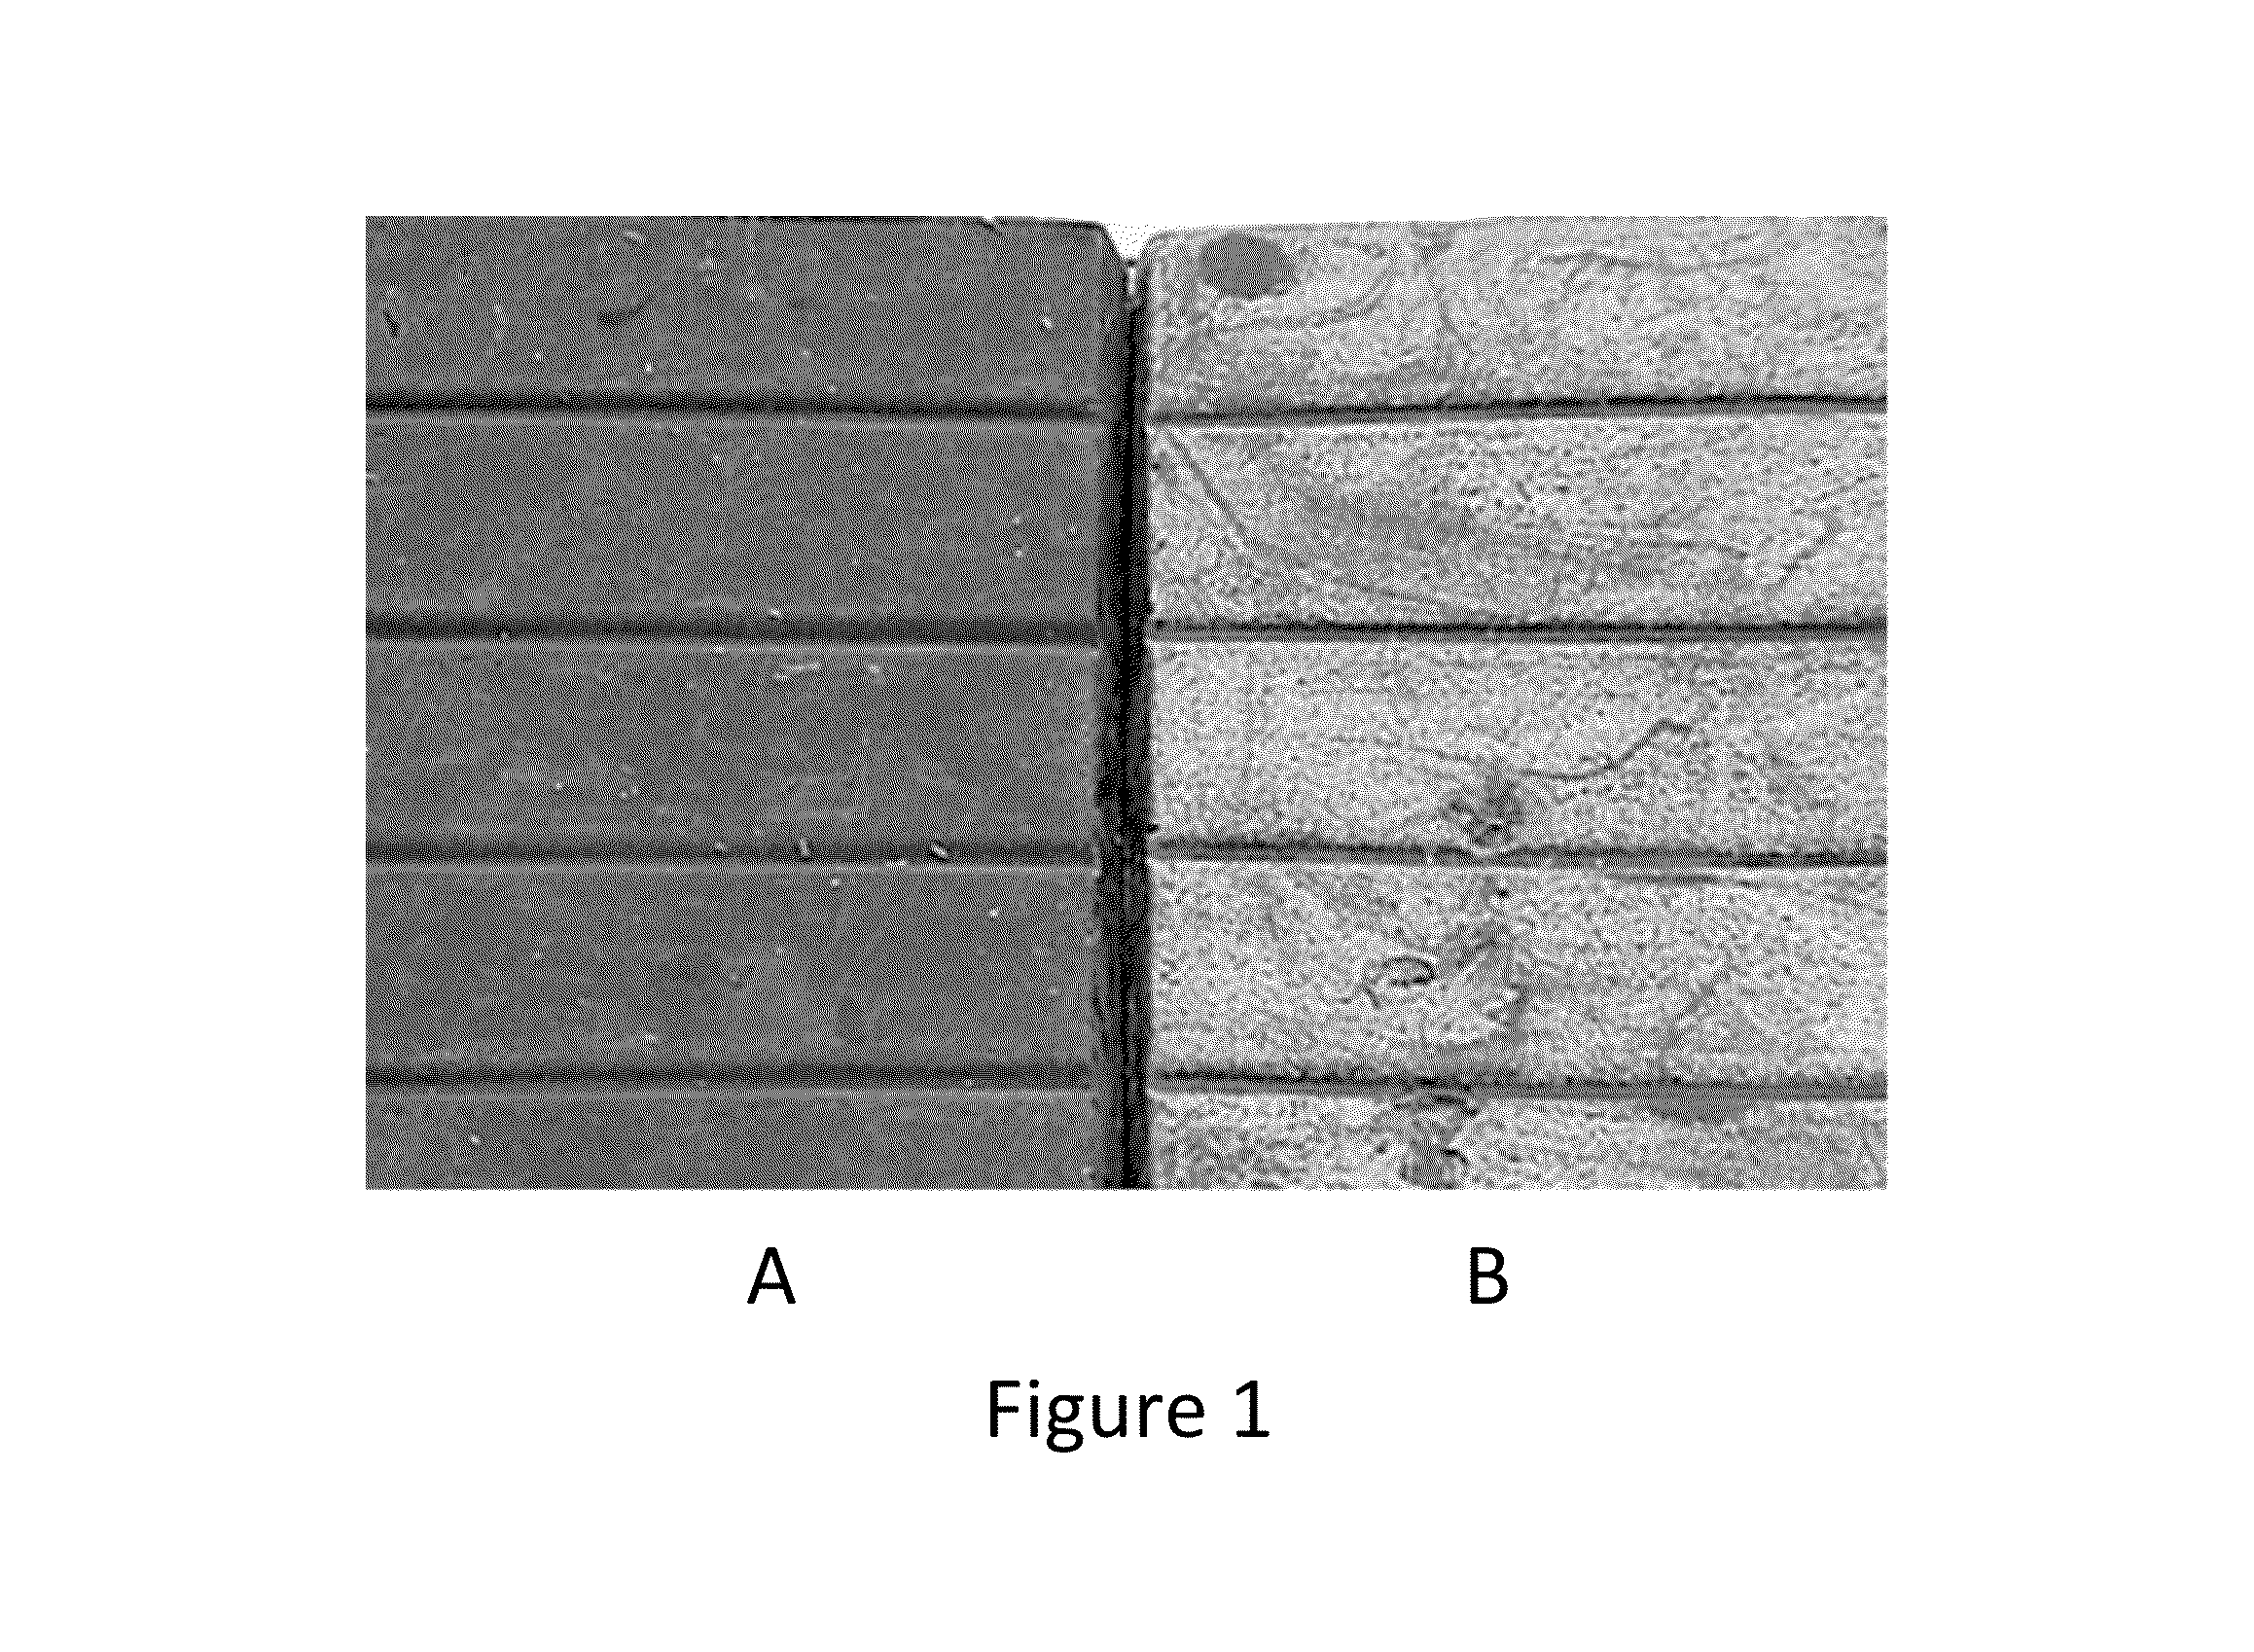 Non-invasive MRI system for analyzing quality of solid food products enveloped by flexible aluminum foil wrapper and methods thereof